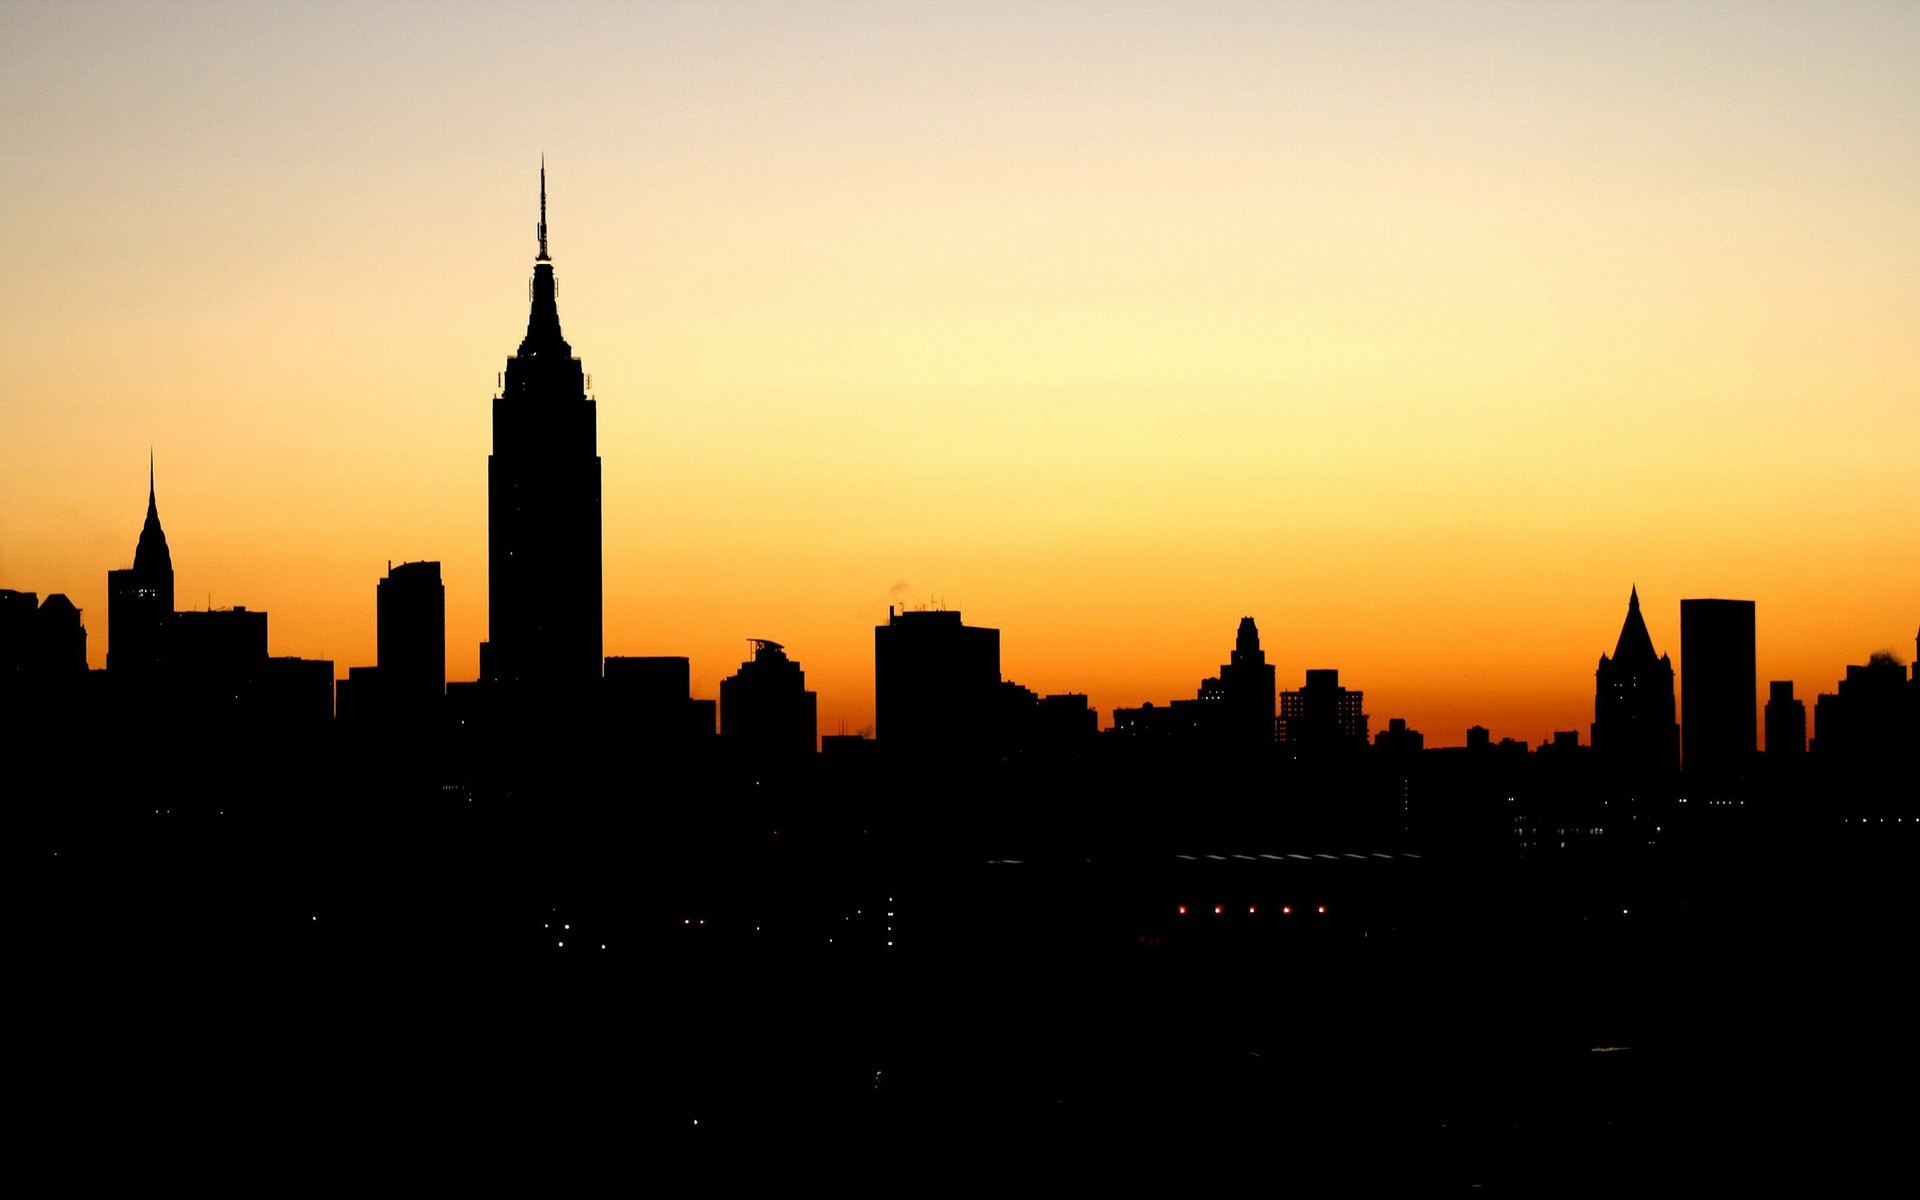 Skyline City Silhouette 21816 Hd Wallpapers in Skyline   Imagescicom